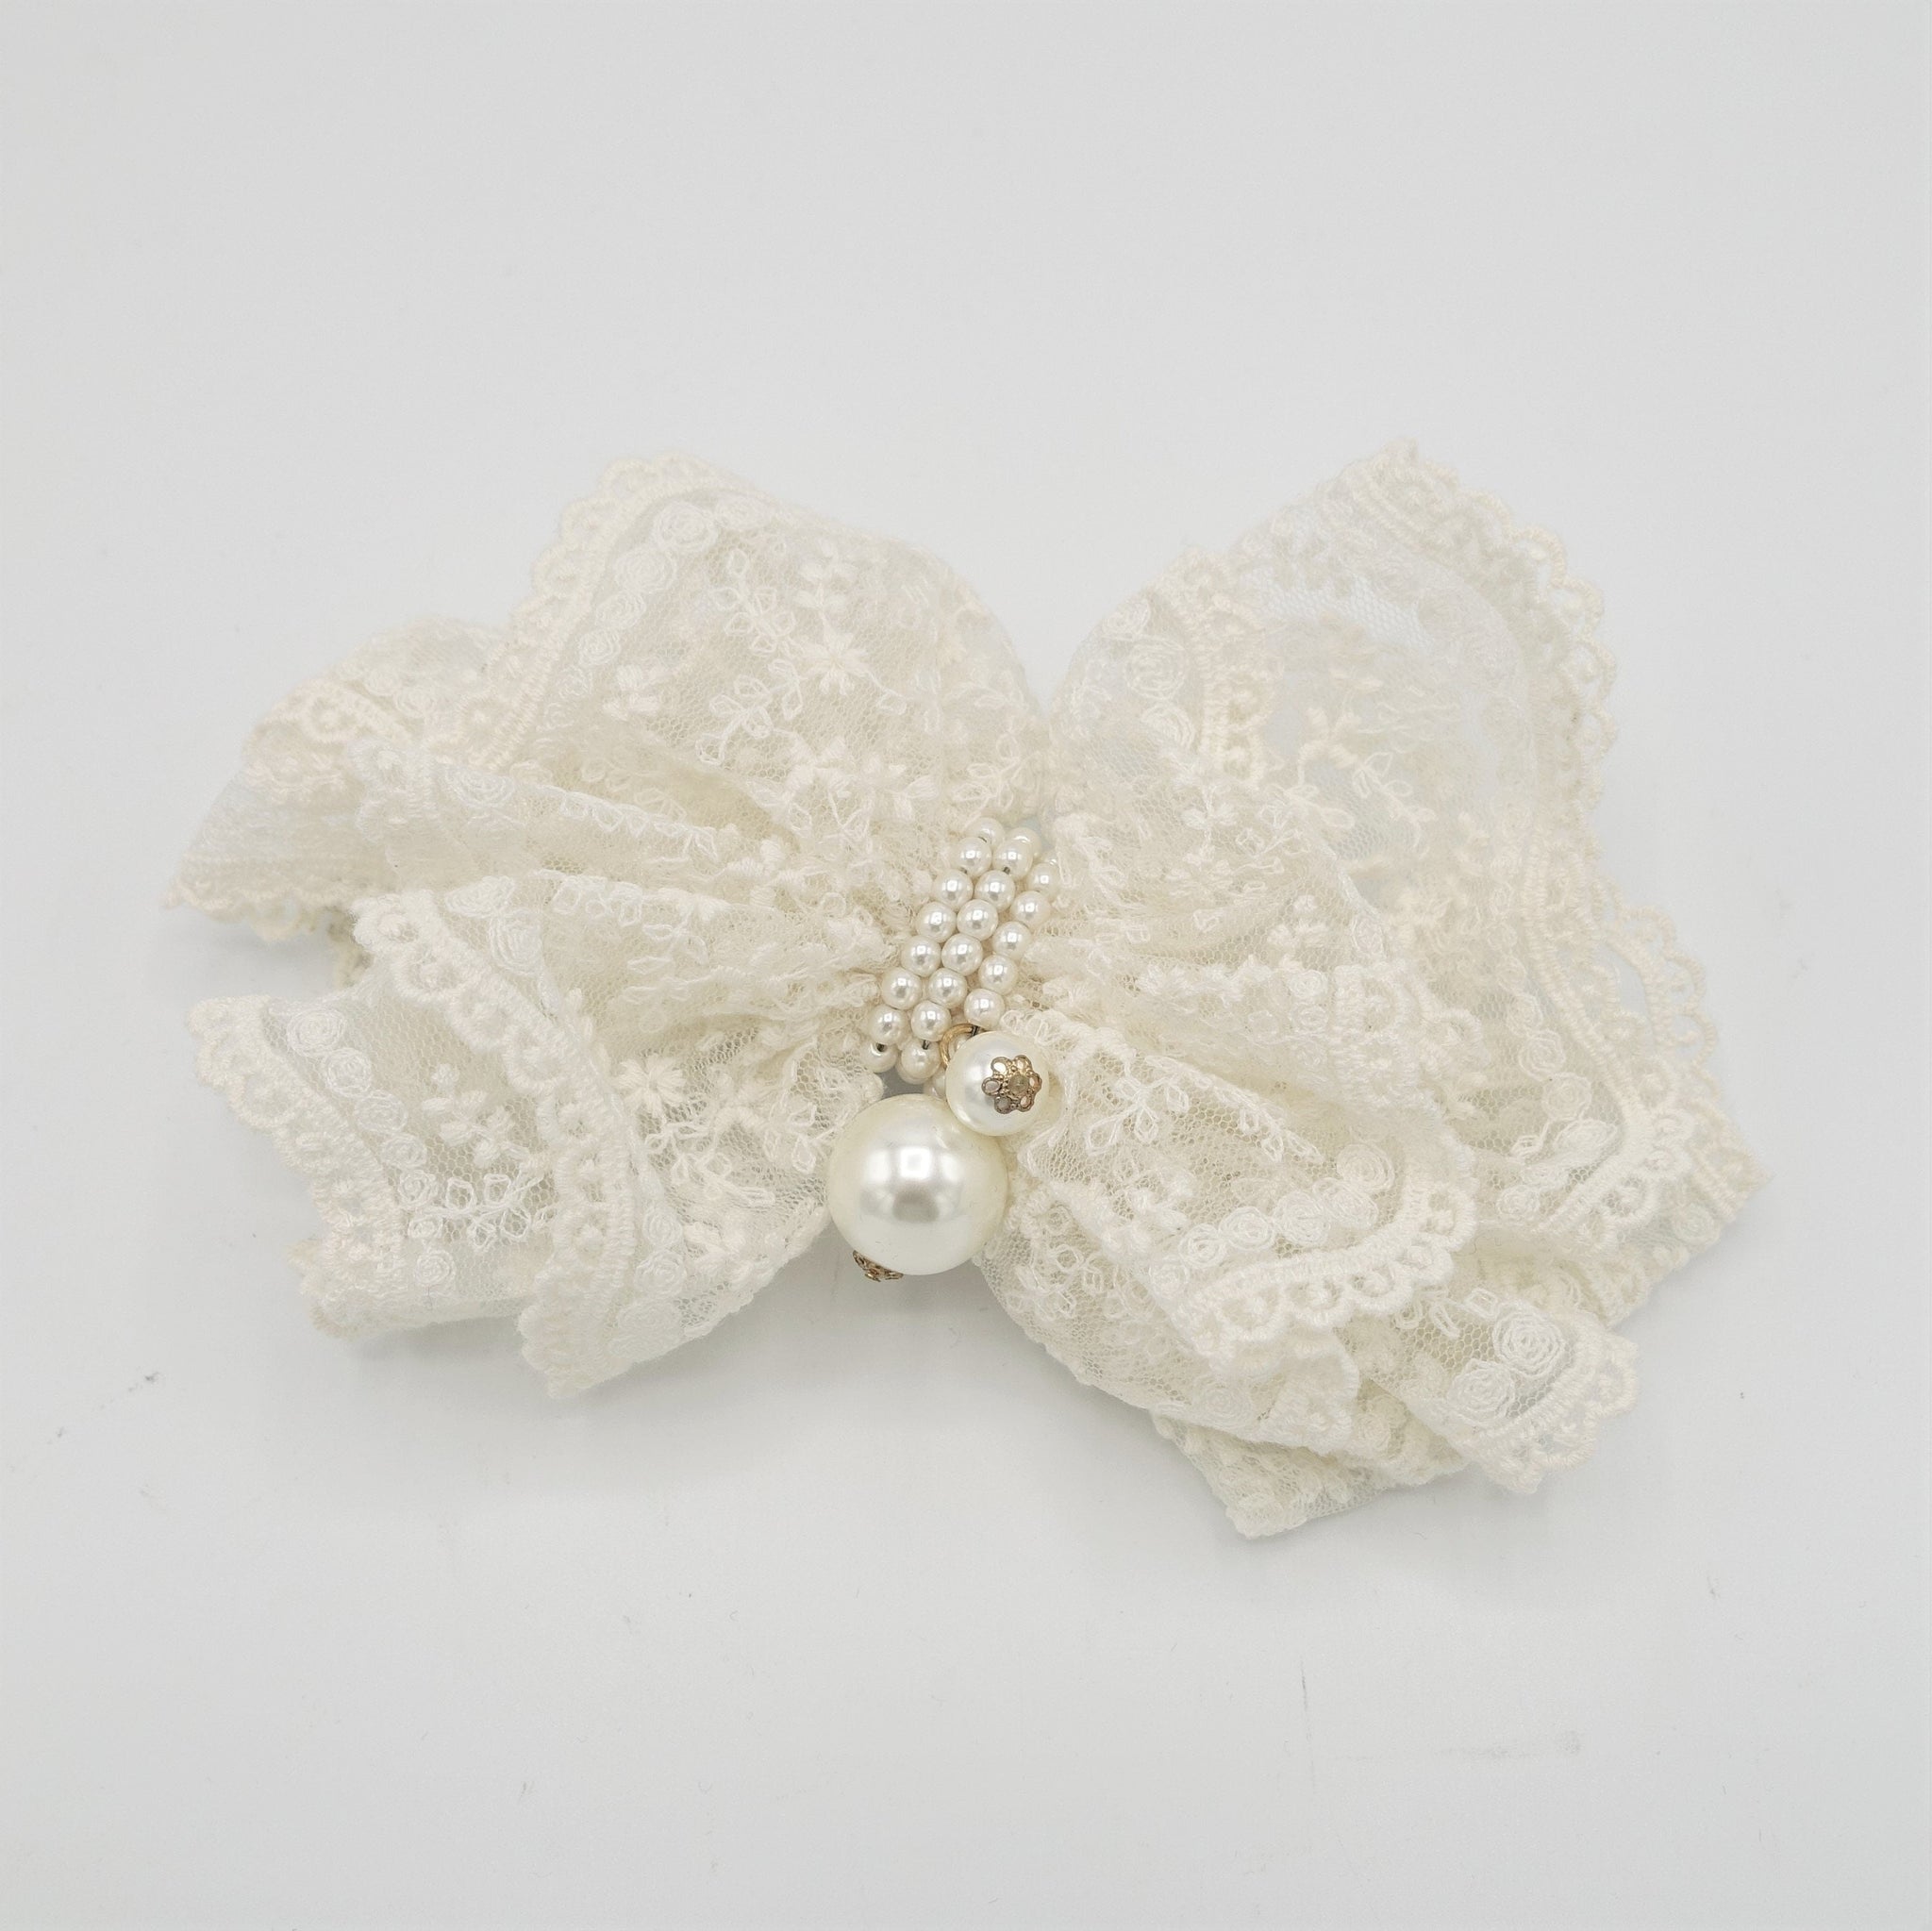 veryshine.com Barrette (Bow) Floral lace layered bow french hair barrette elegant women hair accessory